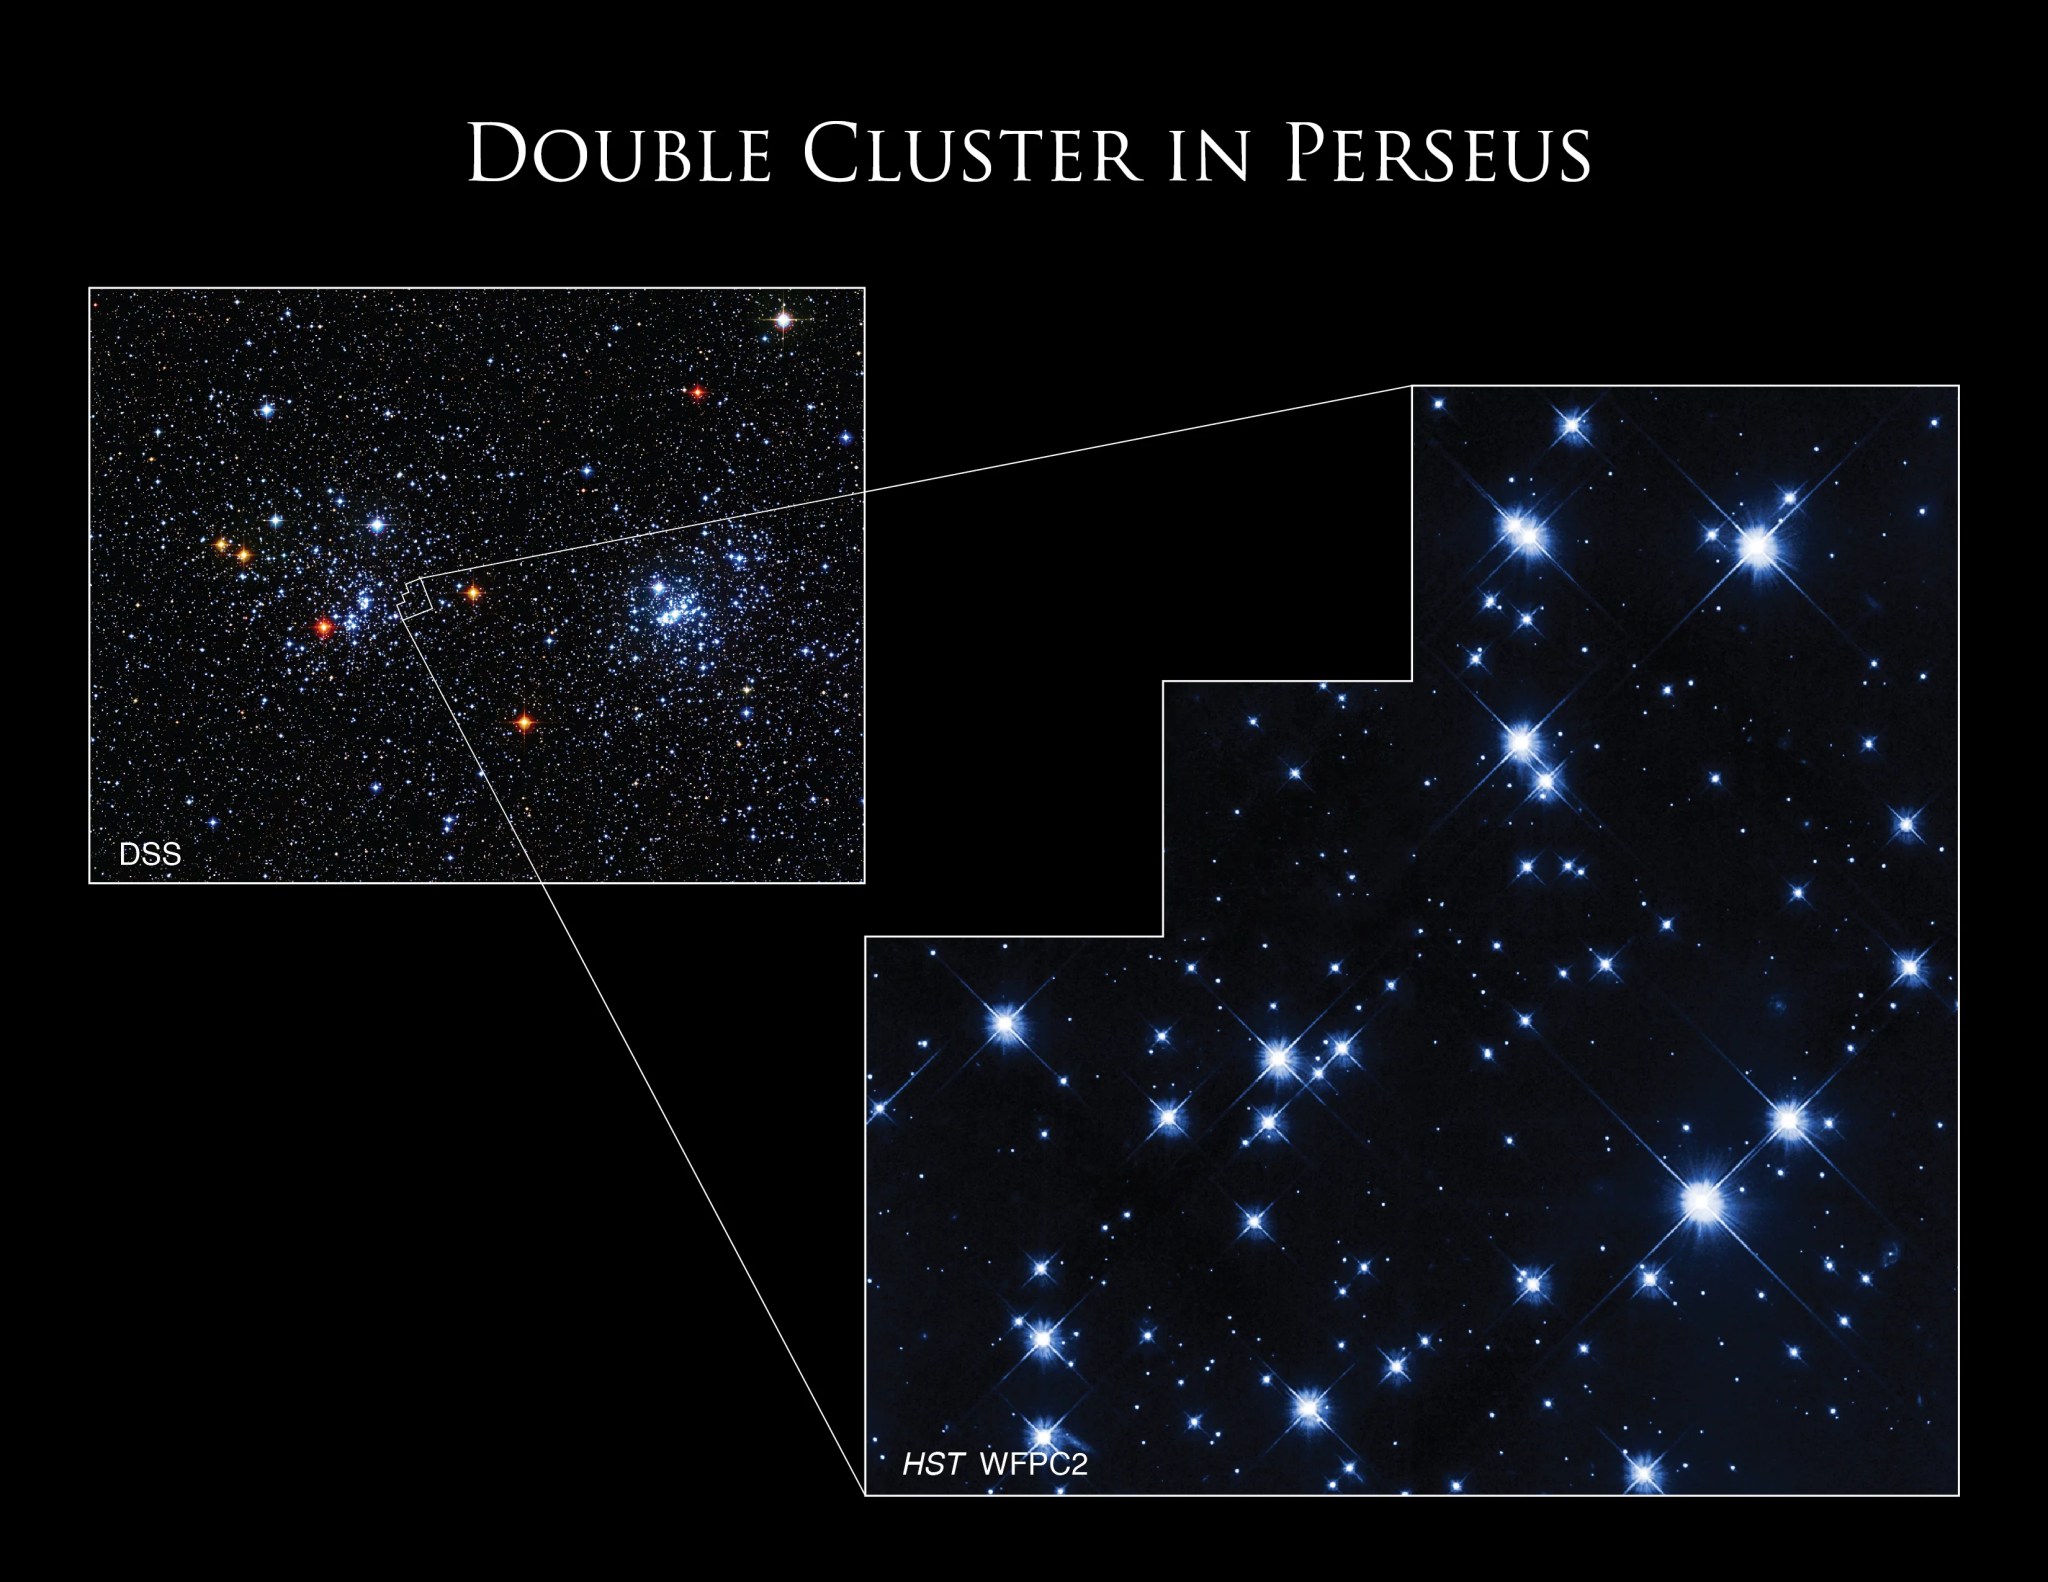 Top left of the image shows a ground based shot of Caldwell 14. Countless stars. To the right is a shot from Hubble of an inset area. Blue stars with a black background.